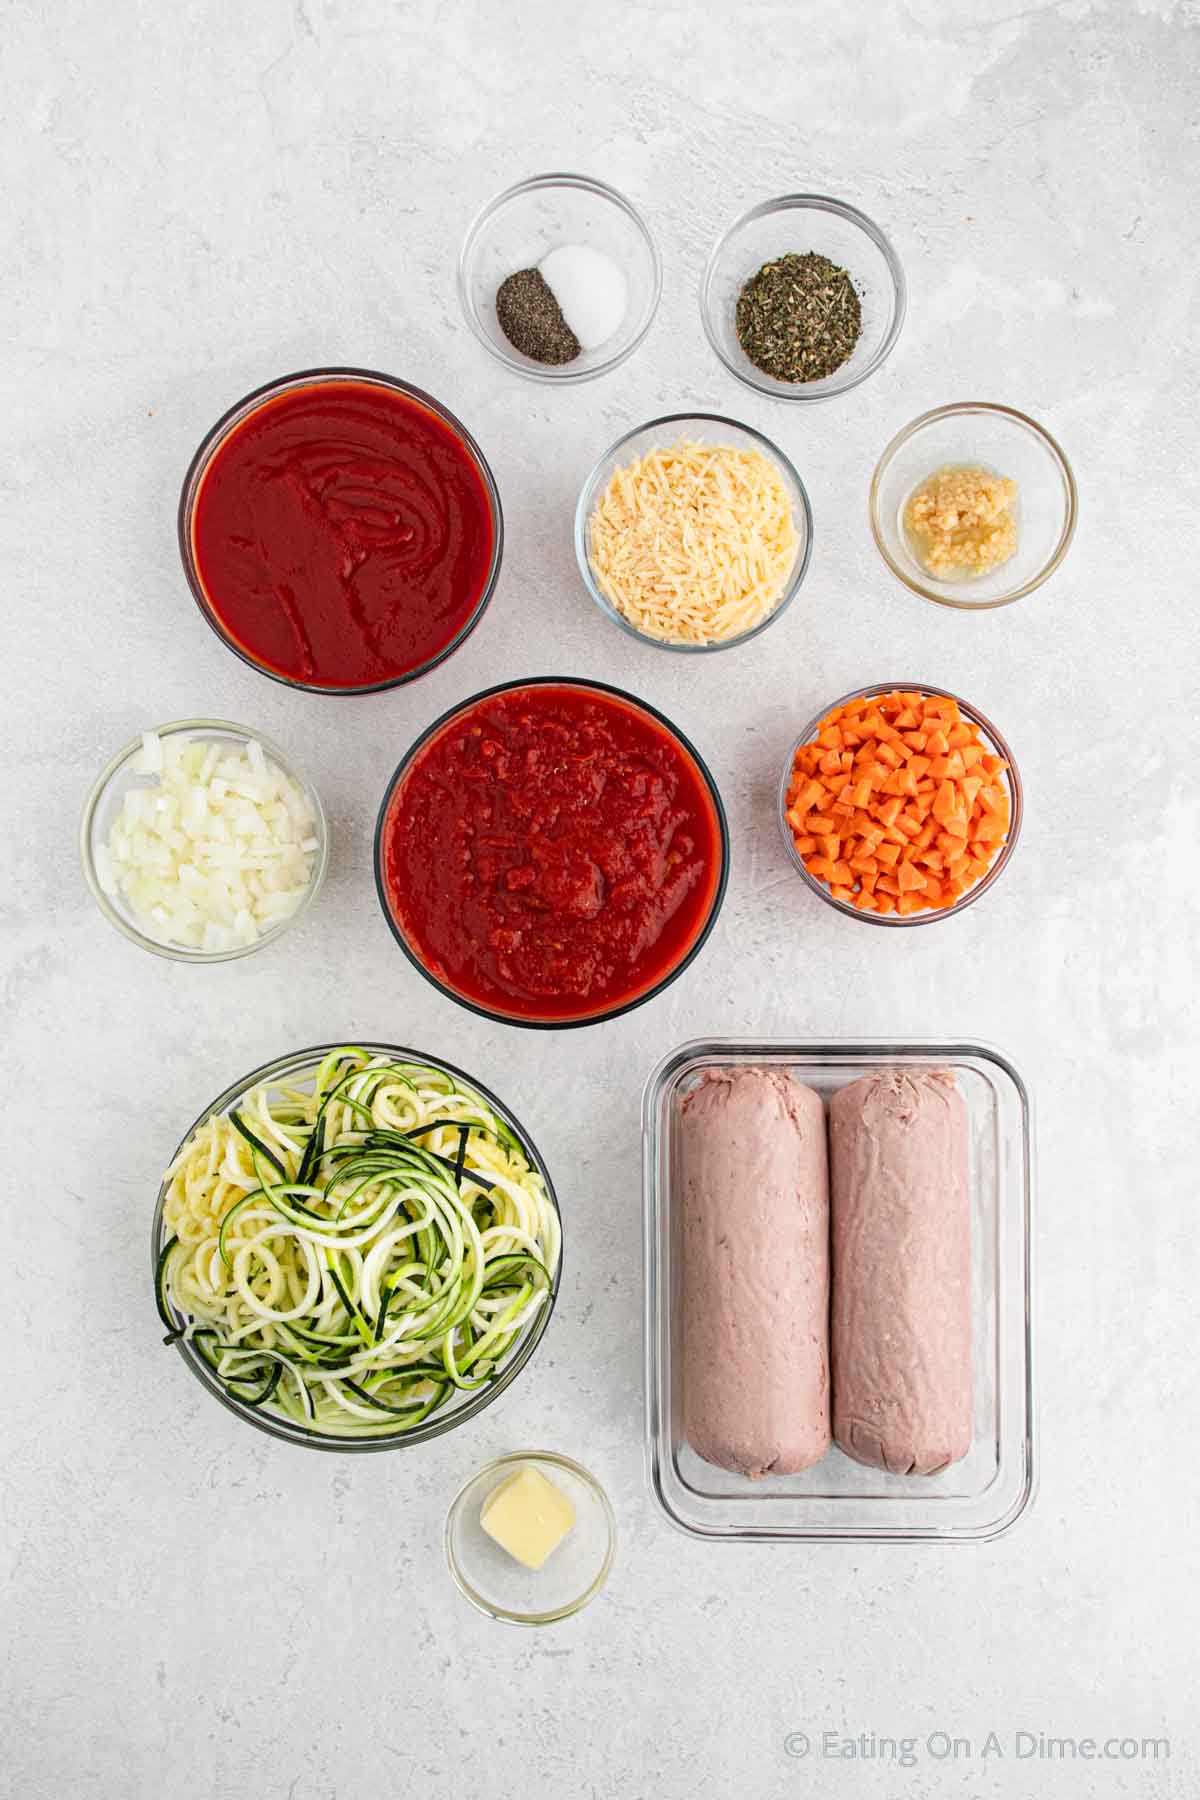 Slow Cooker Bolognese Ingredients - turkey, carrots, onion, garlic, Italian seasoning, salt and pepper, crushed tomatoes, tomato sauce, zucchini, butter, parmesan cheese